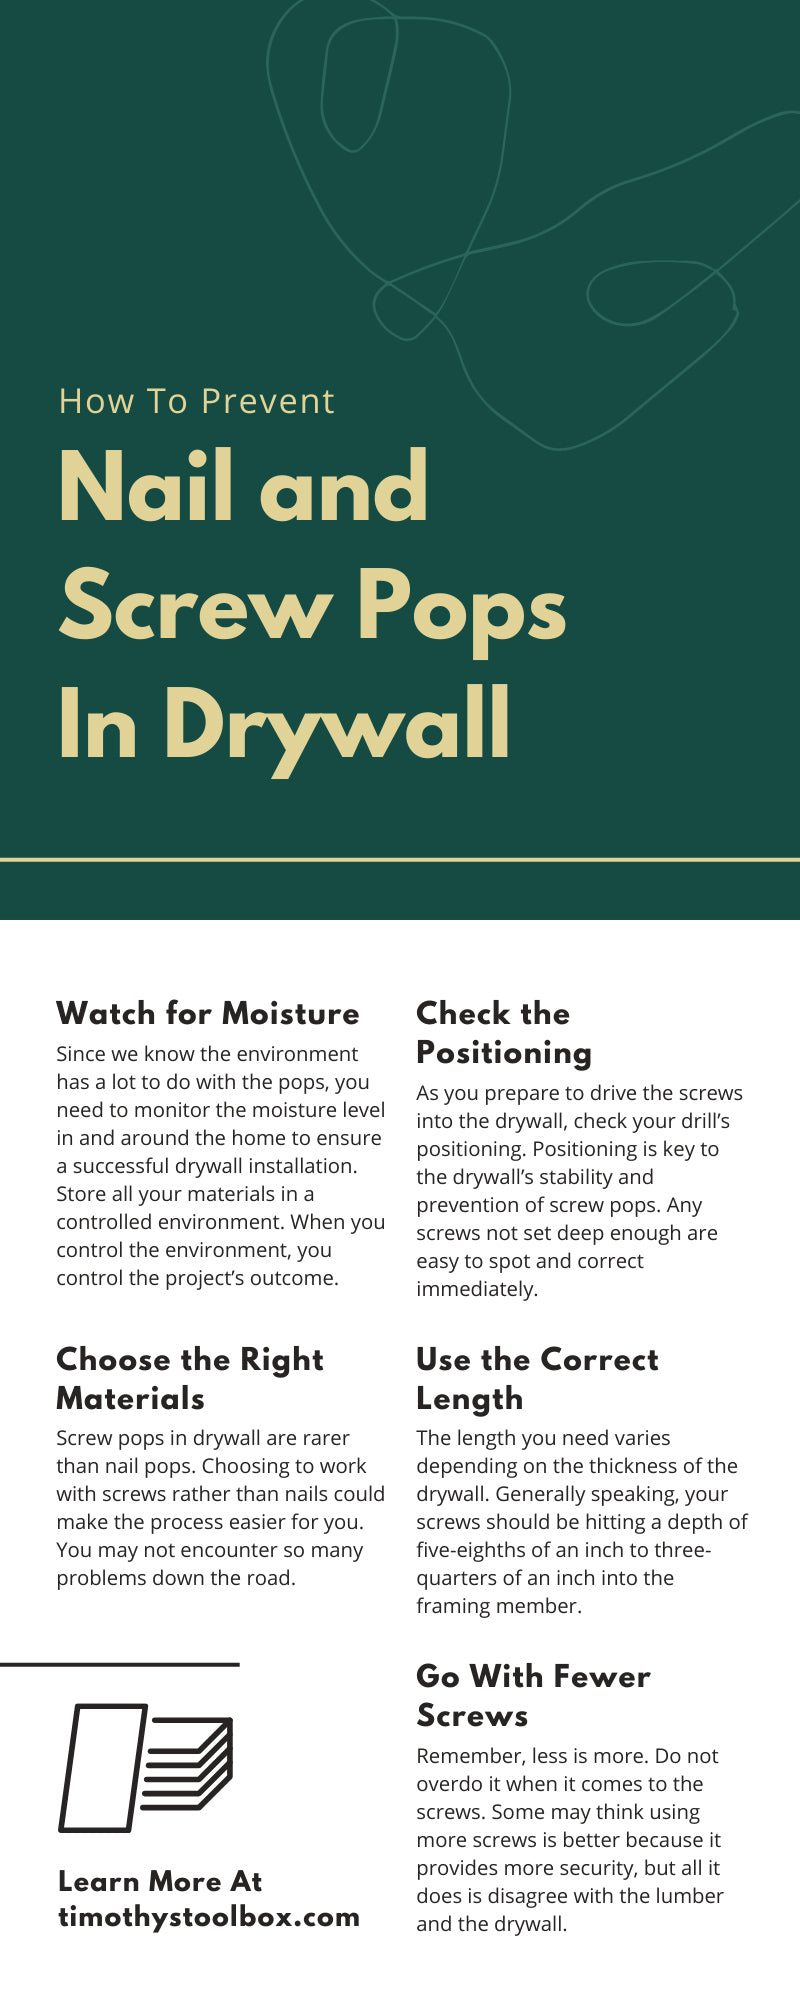 How To Prevent Nail and Screw Pops In Drywall